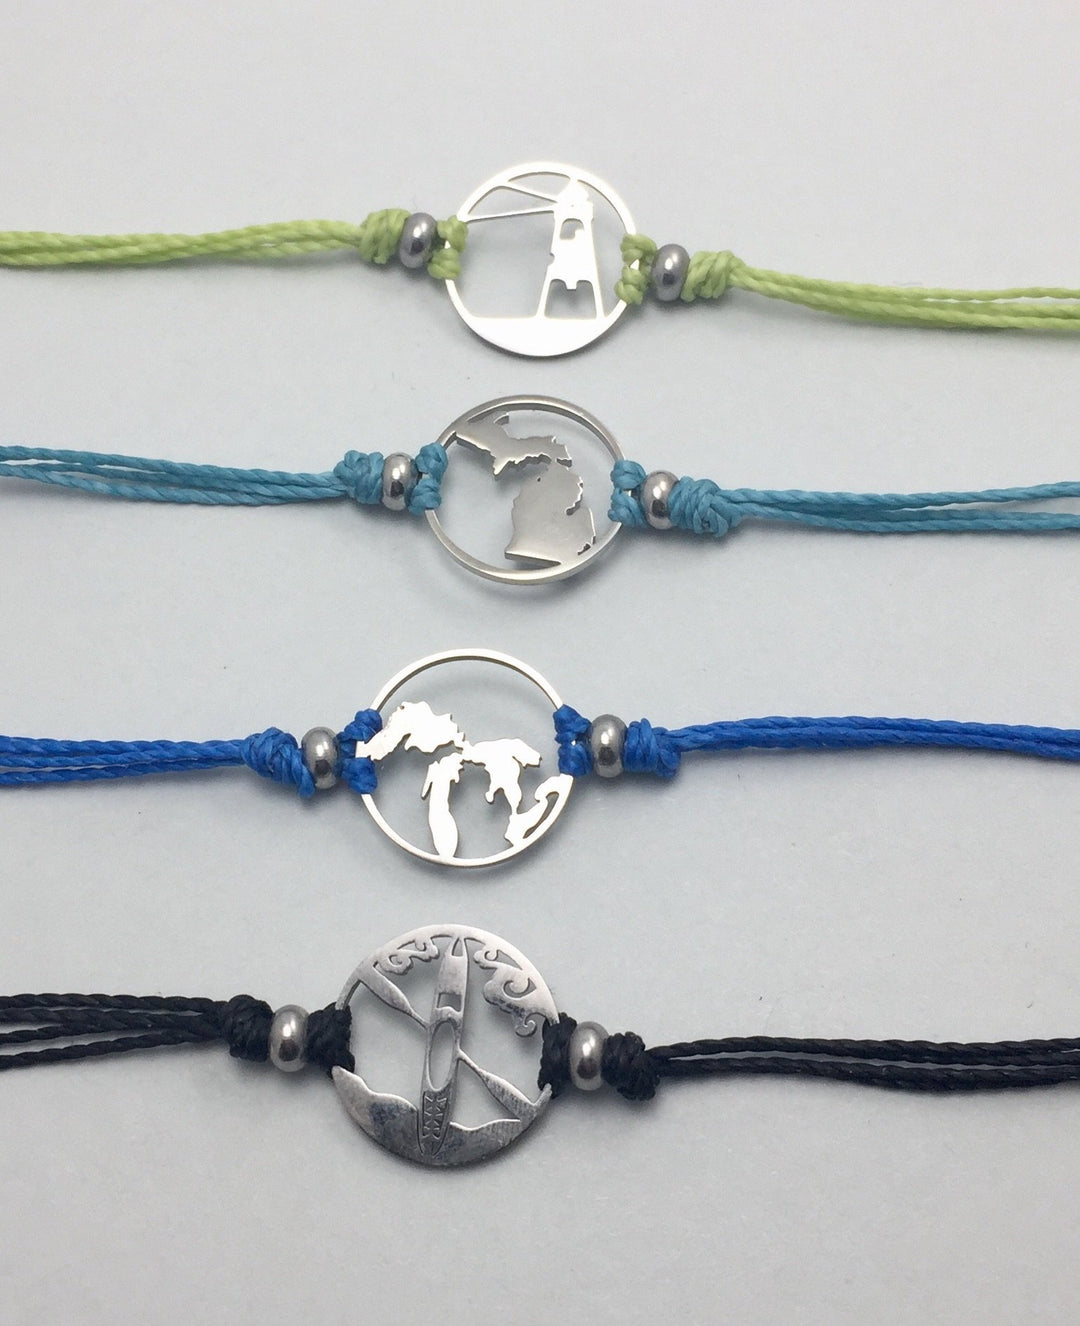 * Turtle Pull Cord Bracelet - Be Inspired UP